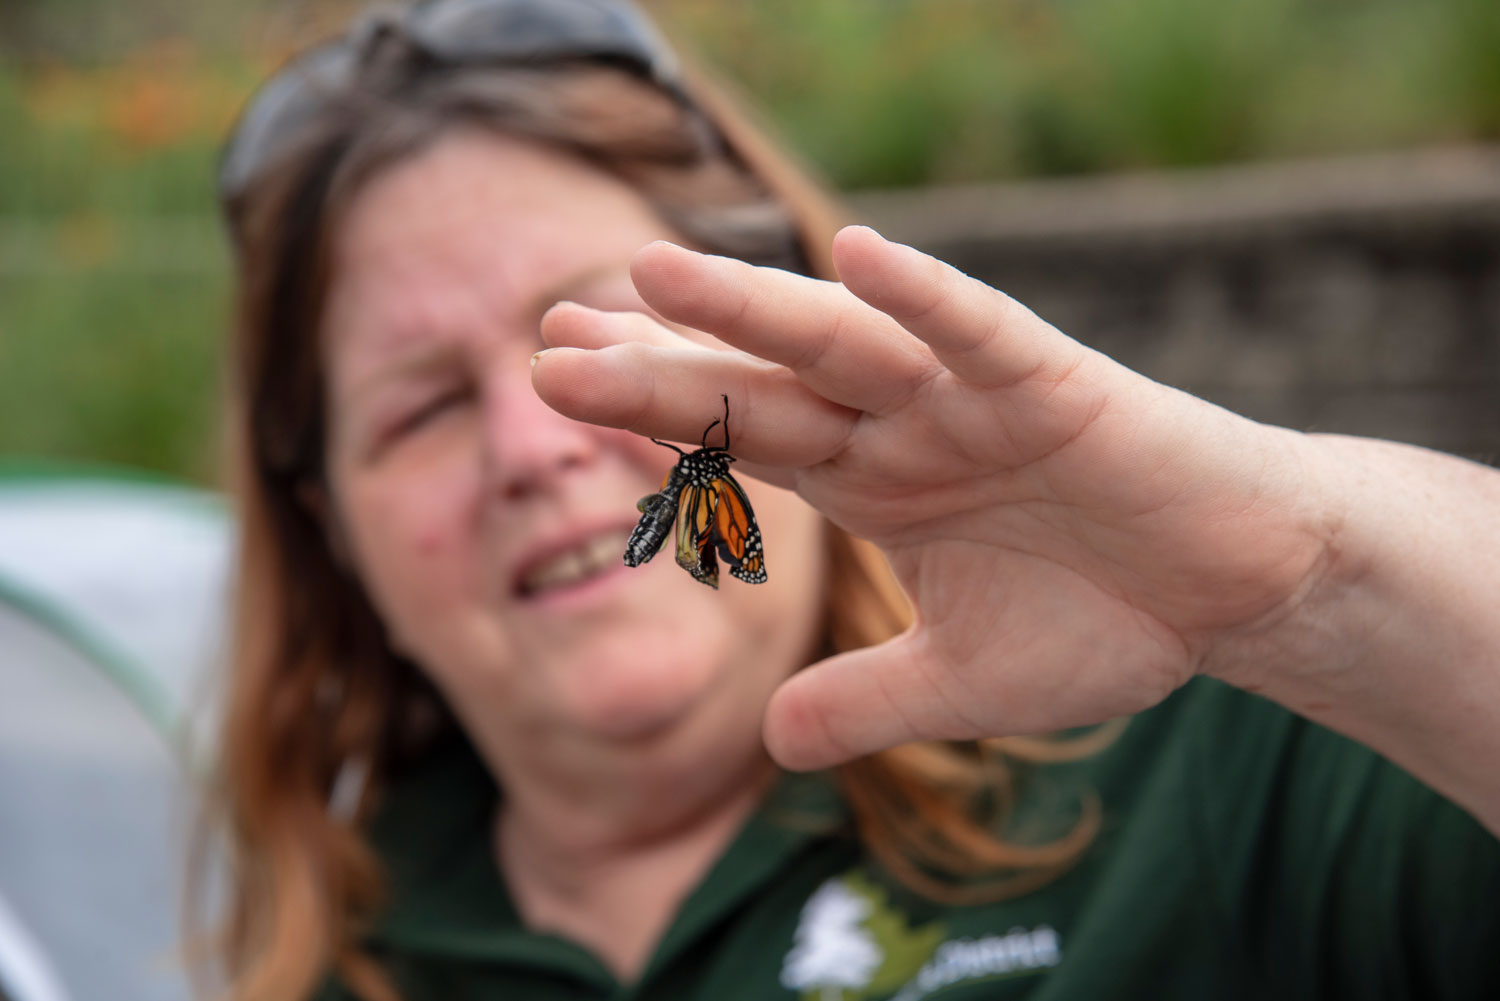 Photo for: For Barb Ferry, Raising Monarchs Is More Than a Hobby